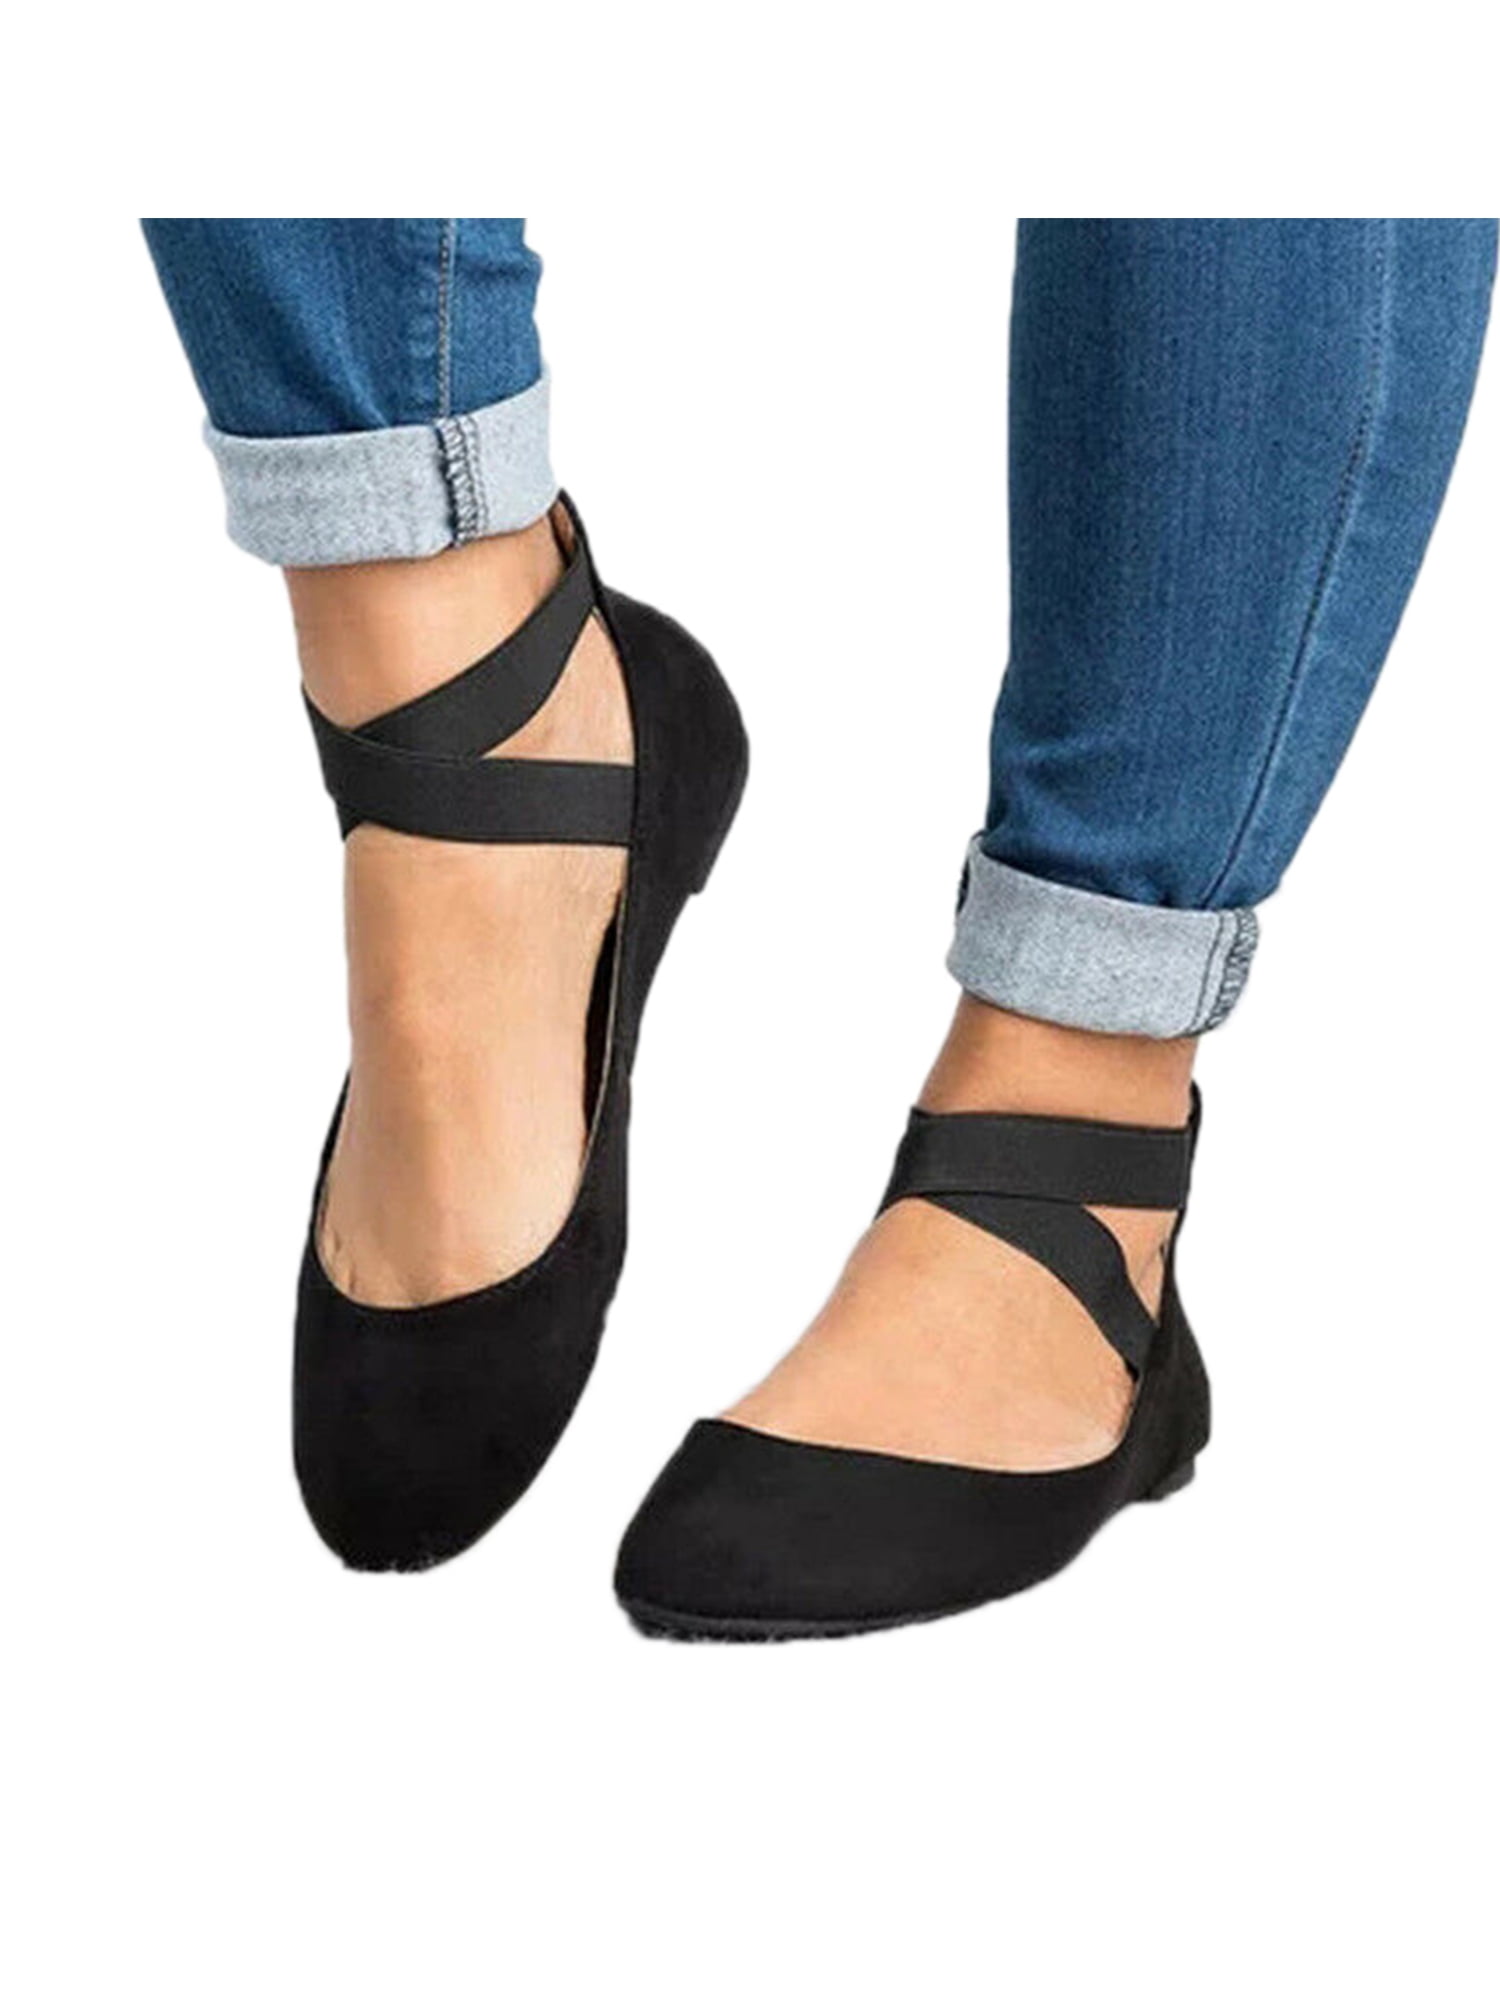 Womens Adjustable Cross Ankle Strap Flats Casual Flat Shoes